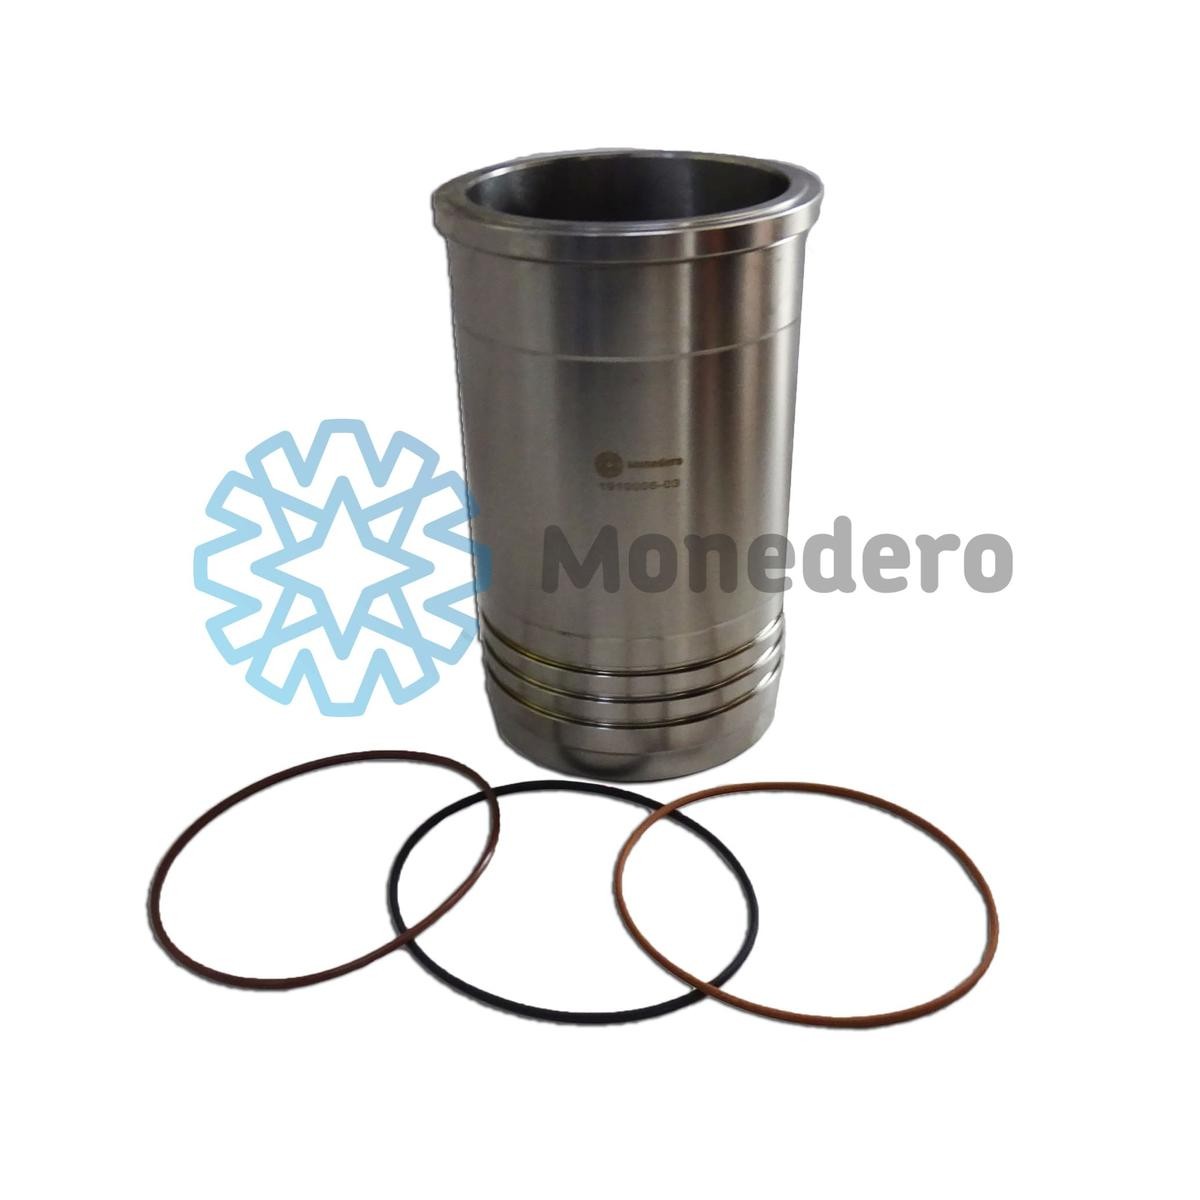 MONEDERO 30011300001 Cylinder Sleeve IVECO experience and price